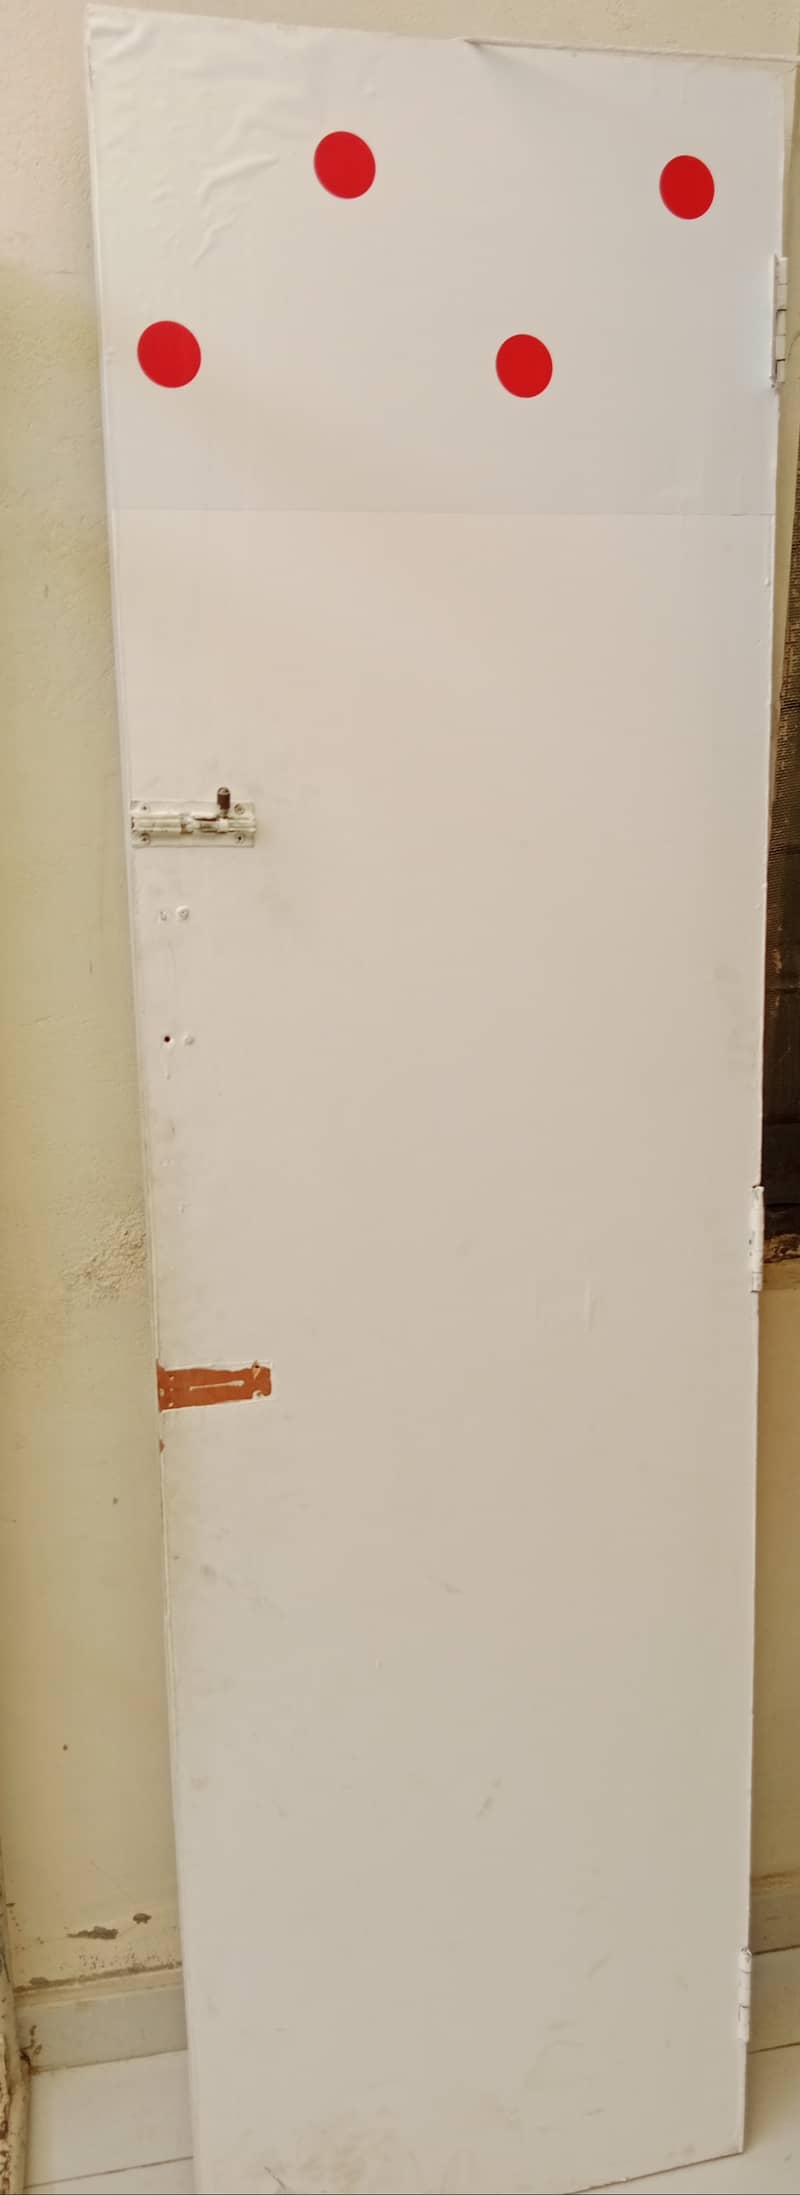 Door for sale neat and clean only WhatsUp 03060103003 11